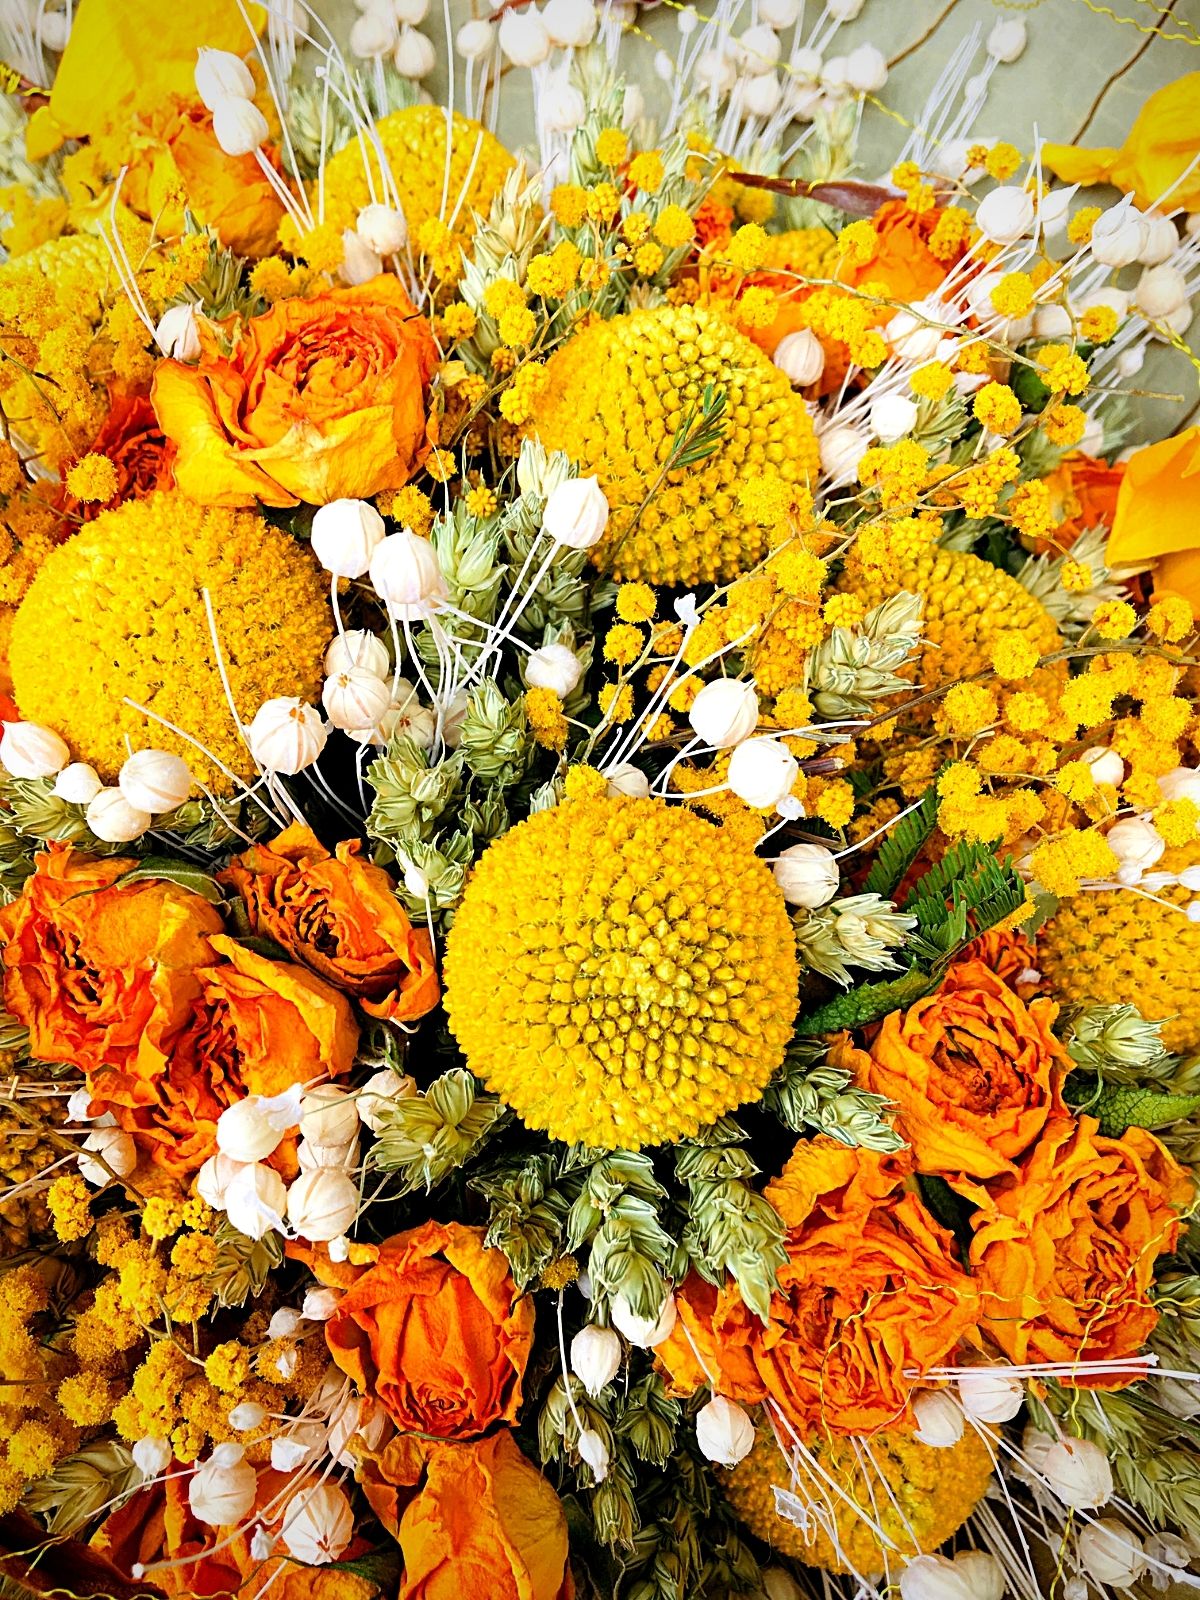 Great Time for Dried Flowers - Mikala Forcellini - Mixed flowers